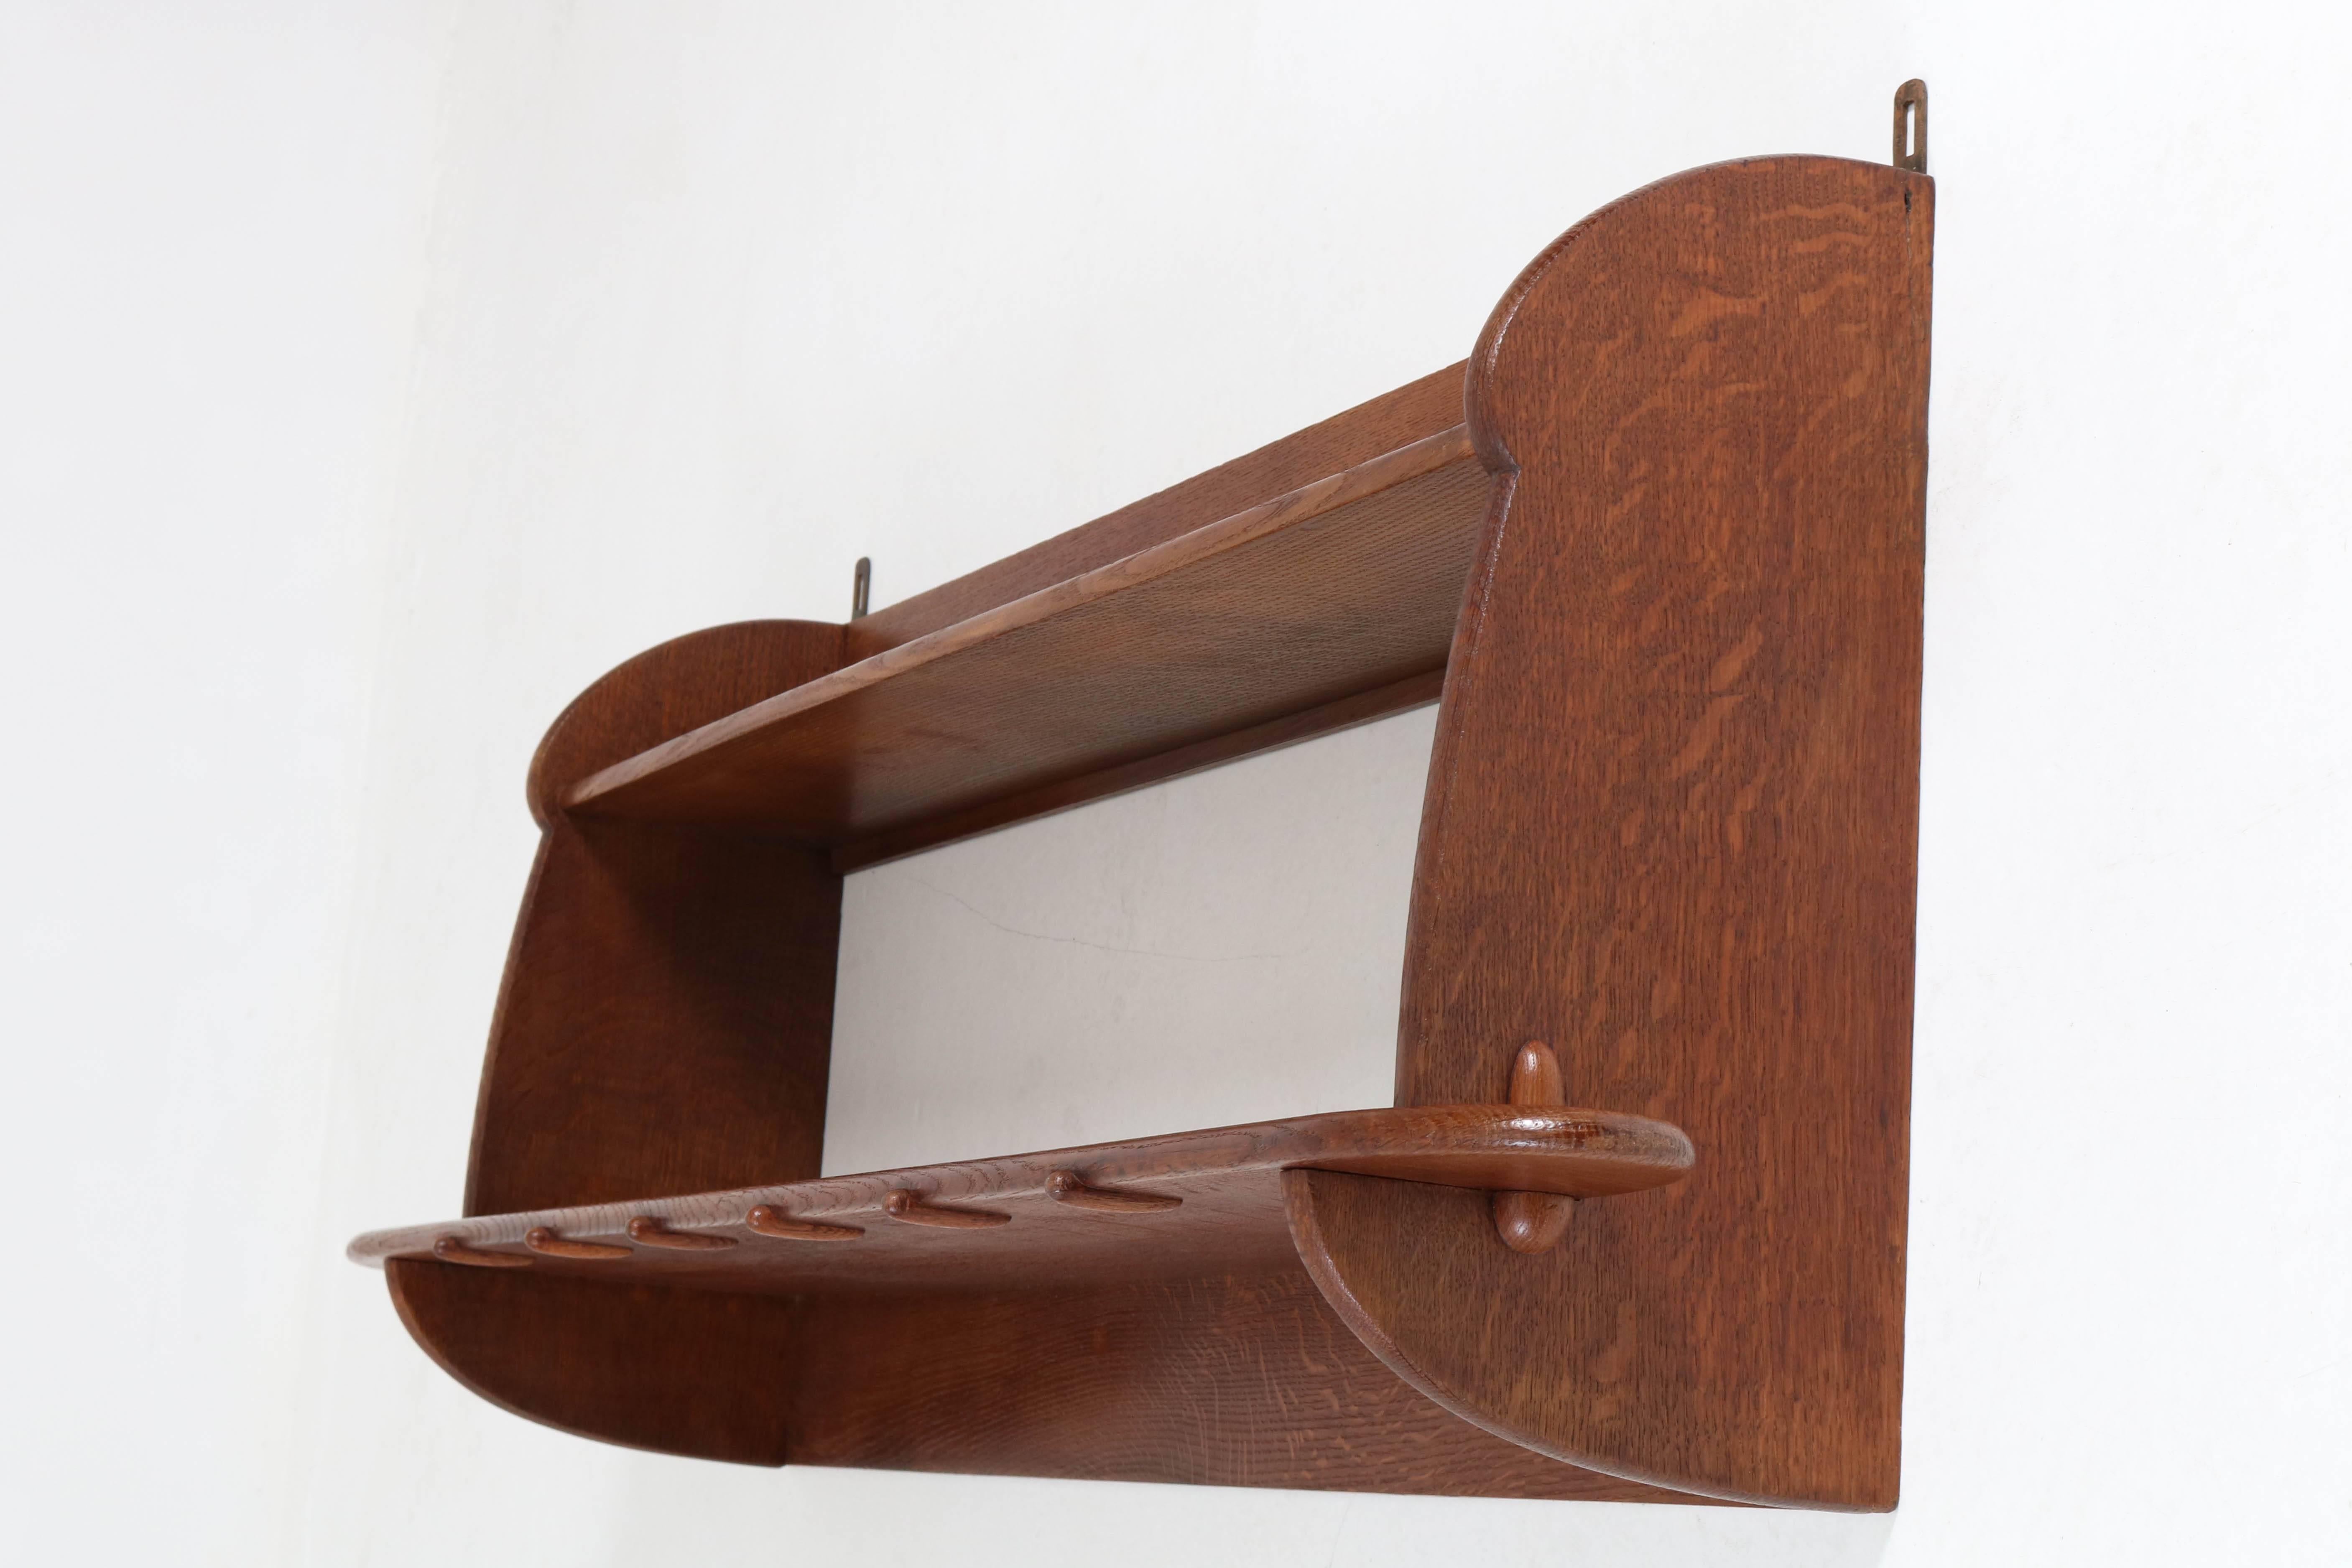 Rare Art Deco Amsterdam School wall book shelf by Paul Bromberg for Pander, 1920s.
Striking Dutch design from the twenties.
Solid oak and marked with metal tag and brand mark.
In good original condition with minor wear consistent with age and